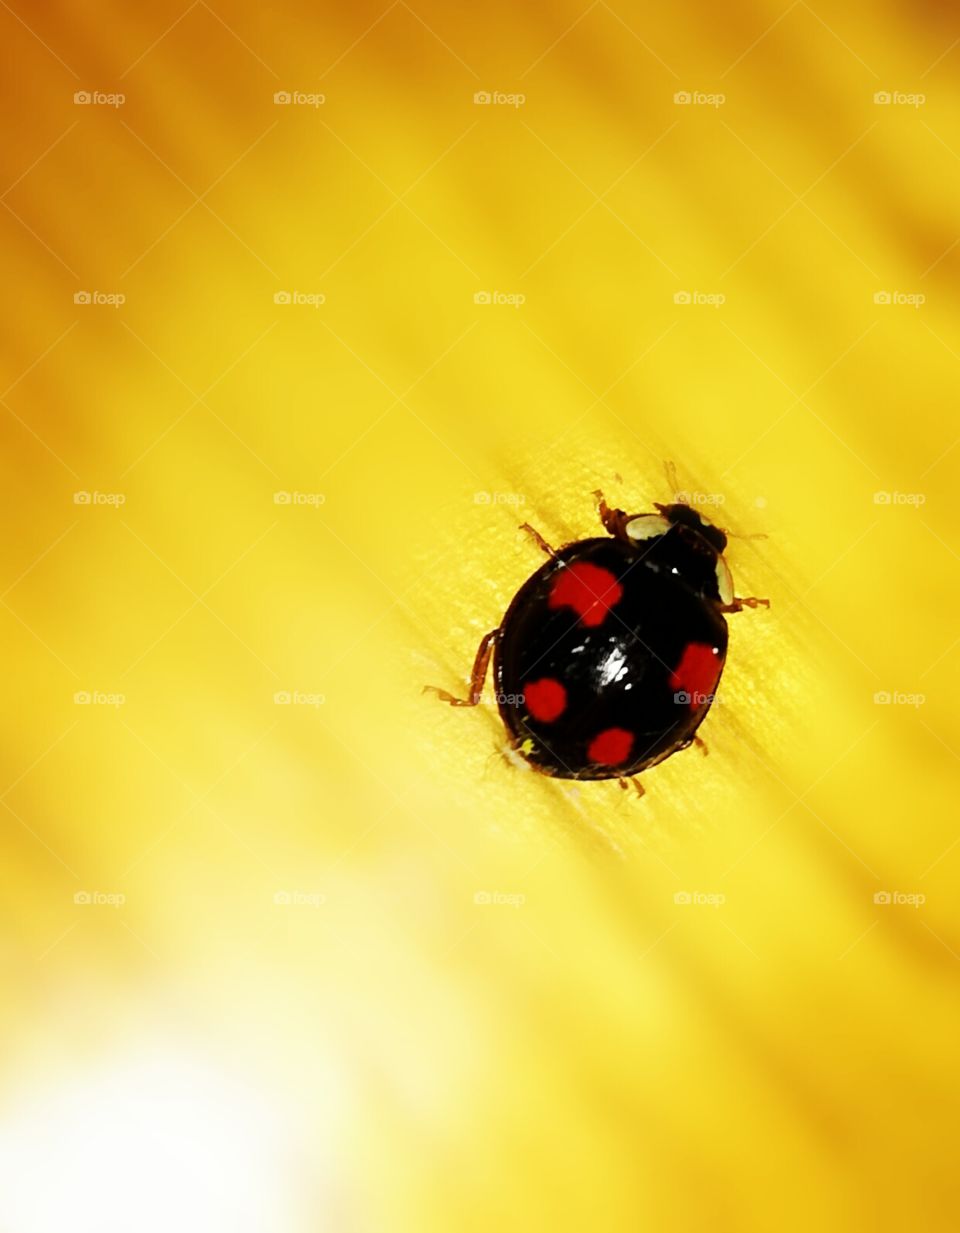 Ladybug, Insect, Beetle, Nature, Spider